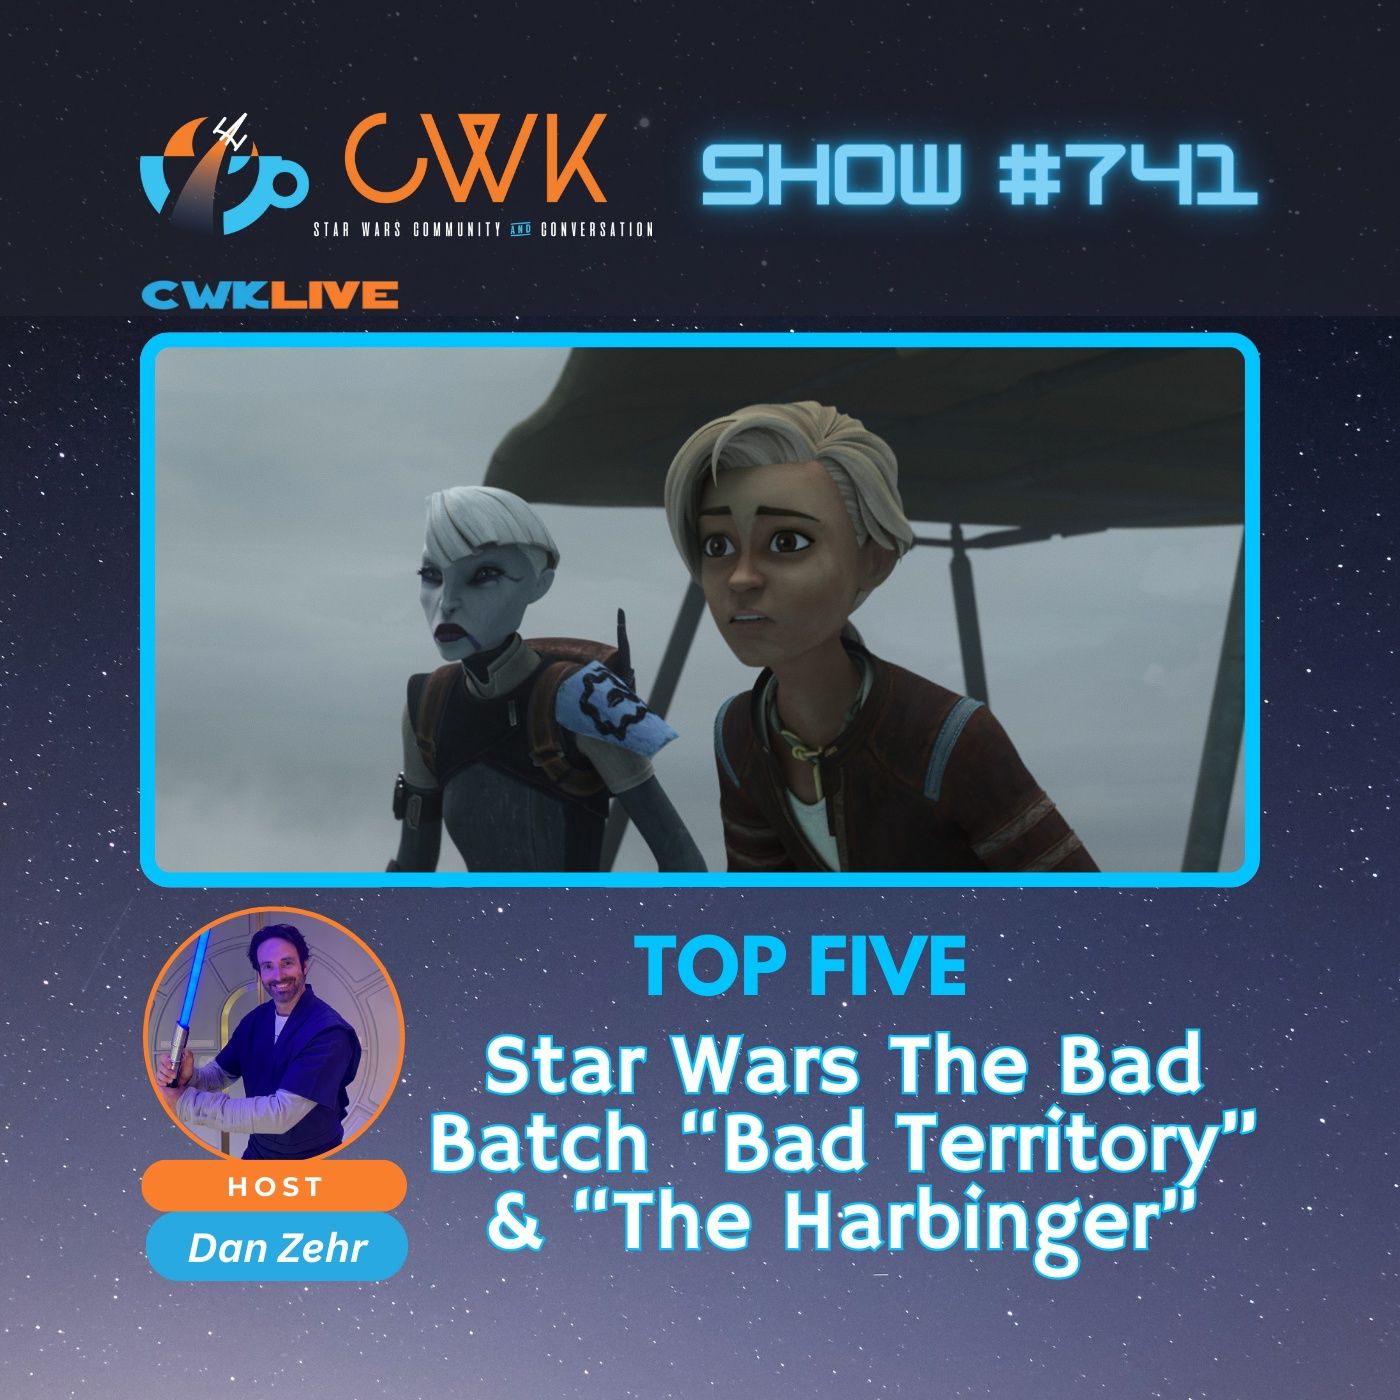 CWK Show #741 LIVE: Top Five Moments from The Bad Batch "Bad Territory" & "The Harbinger"